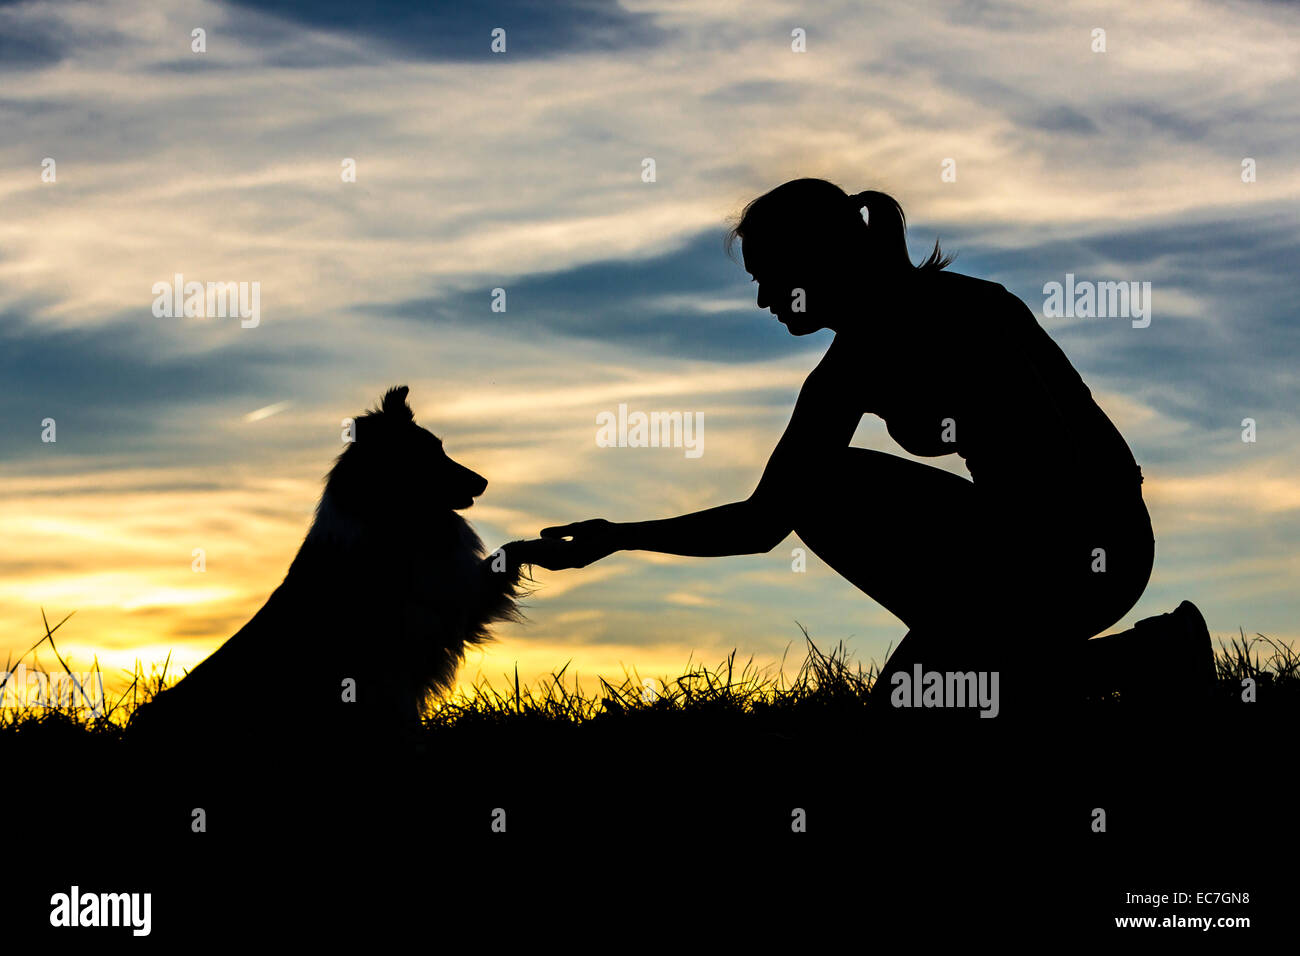 Germany, Woman with dog, Silhouettes at sunset Stock Photo